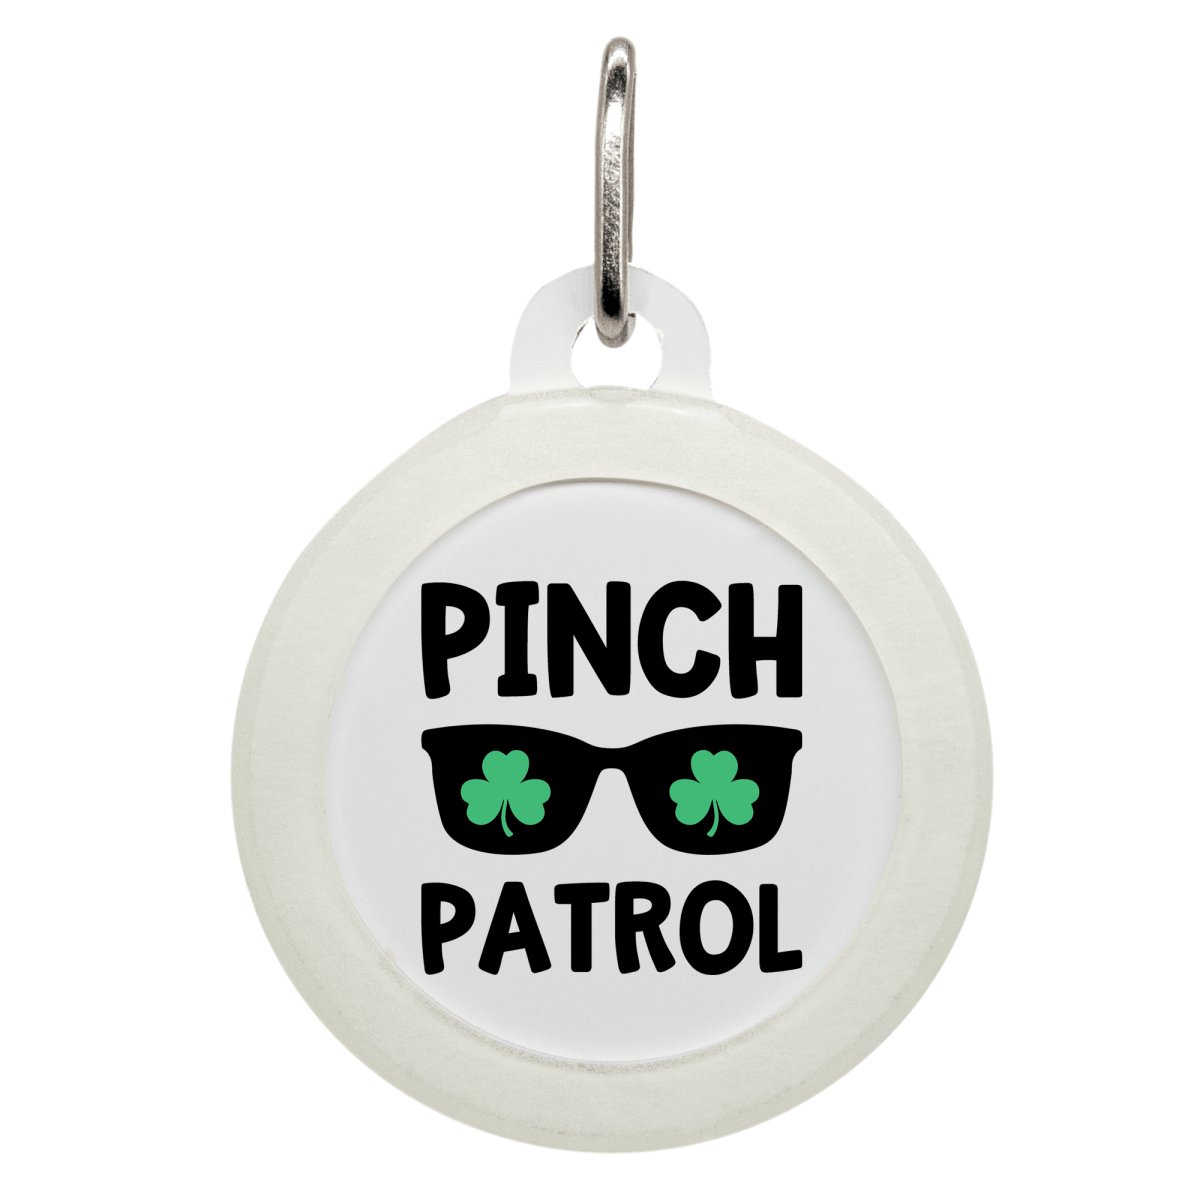 Pinch Patrol Name Tag - Oh My Paw'd